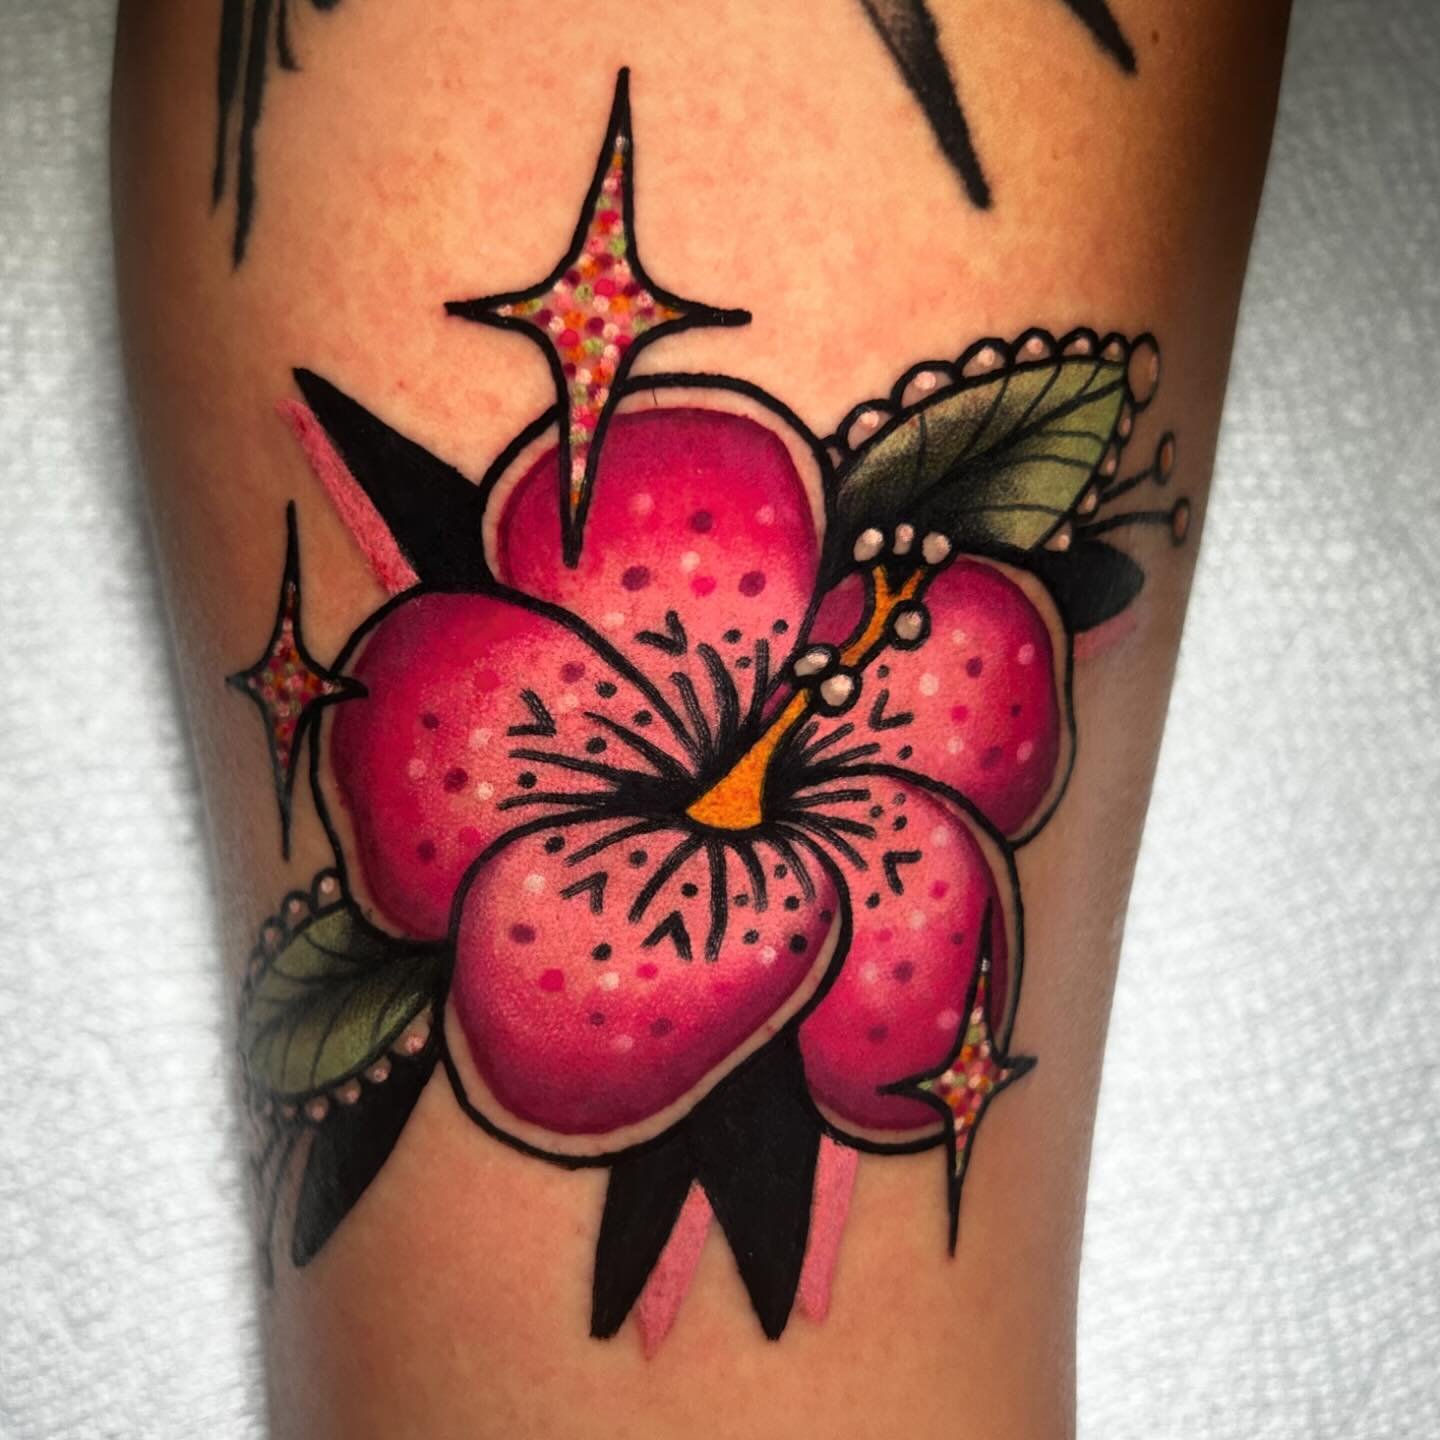 🌺🌺 picked from my predrawn designs 💓 Let&rsquo;s make more flowers this May 🌺🌺

💓Now booking for the summer💓

#hibiscus #hibiscustattoo #flowertattoo #colortattoo #stpetetattoos #tampatattooartist #floridatattooartist #boldtattoos #femaletatto